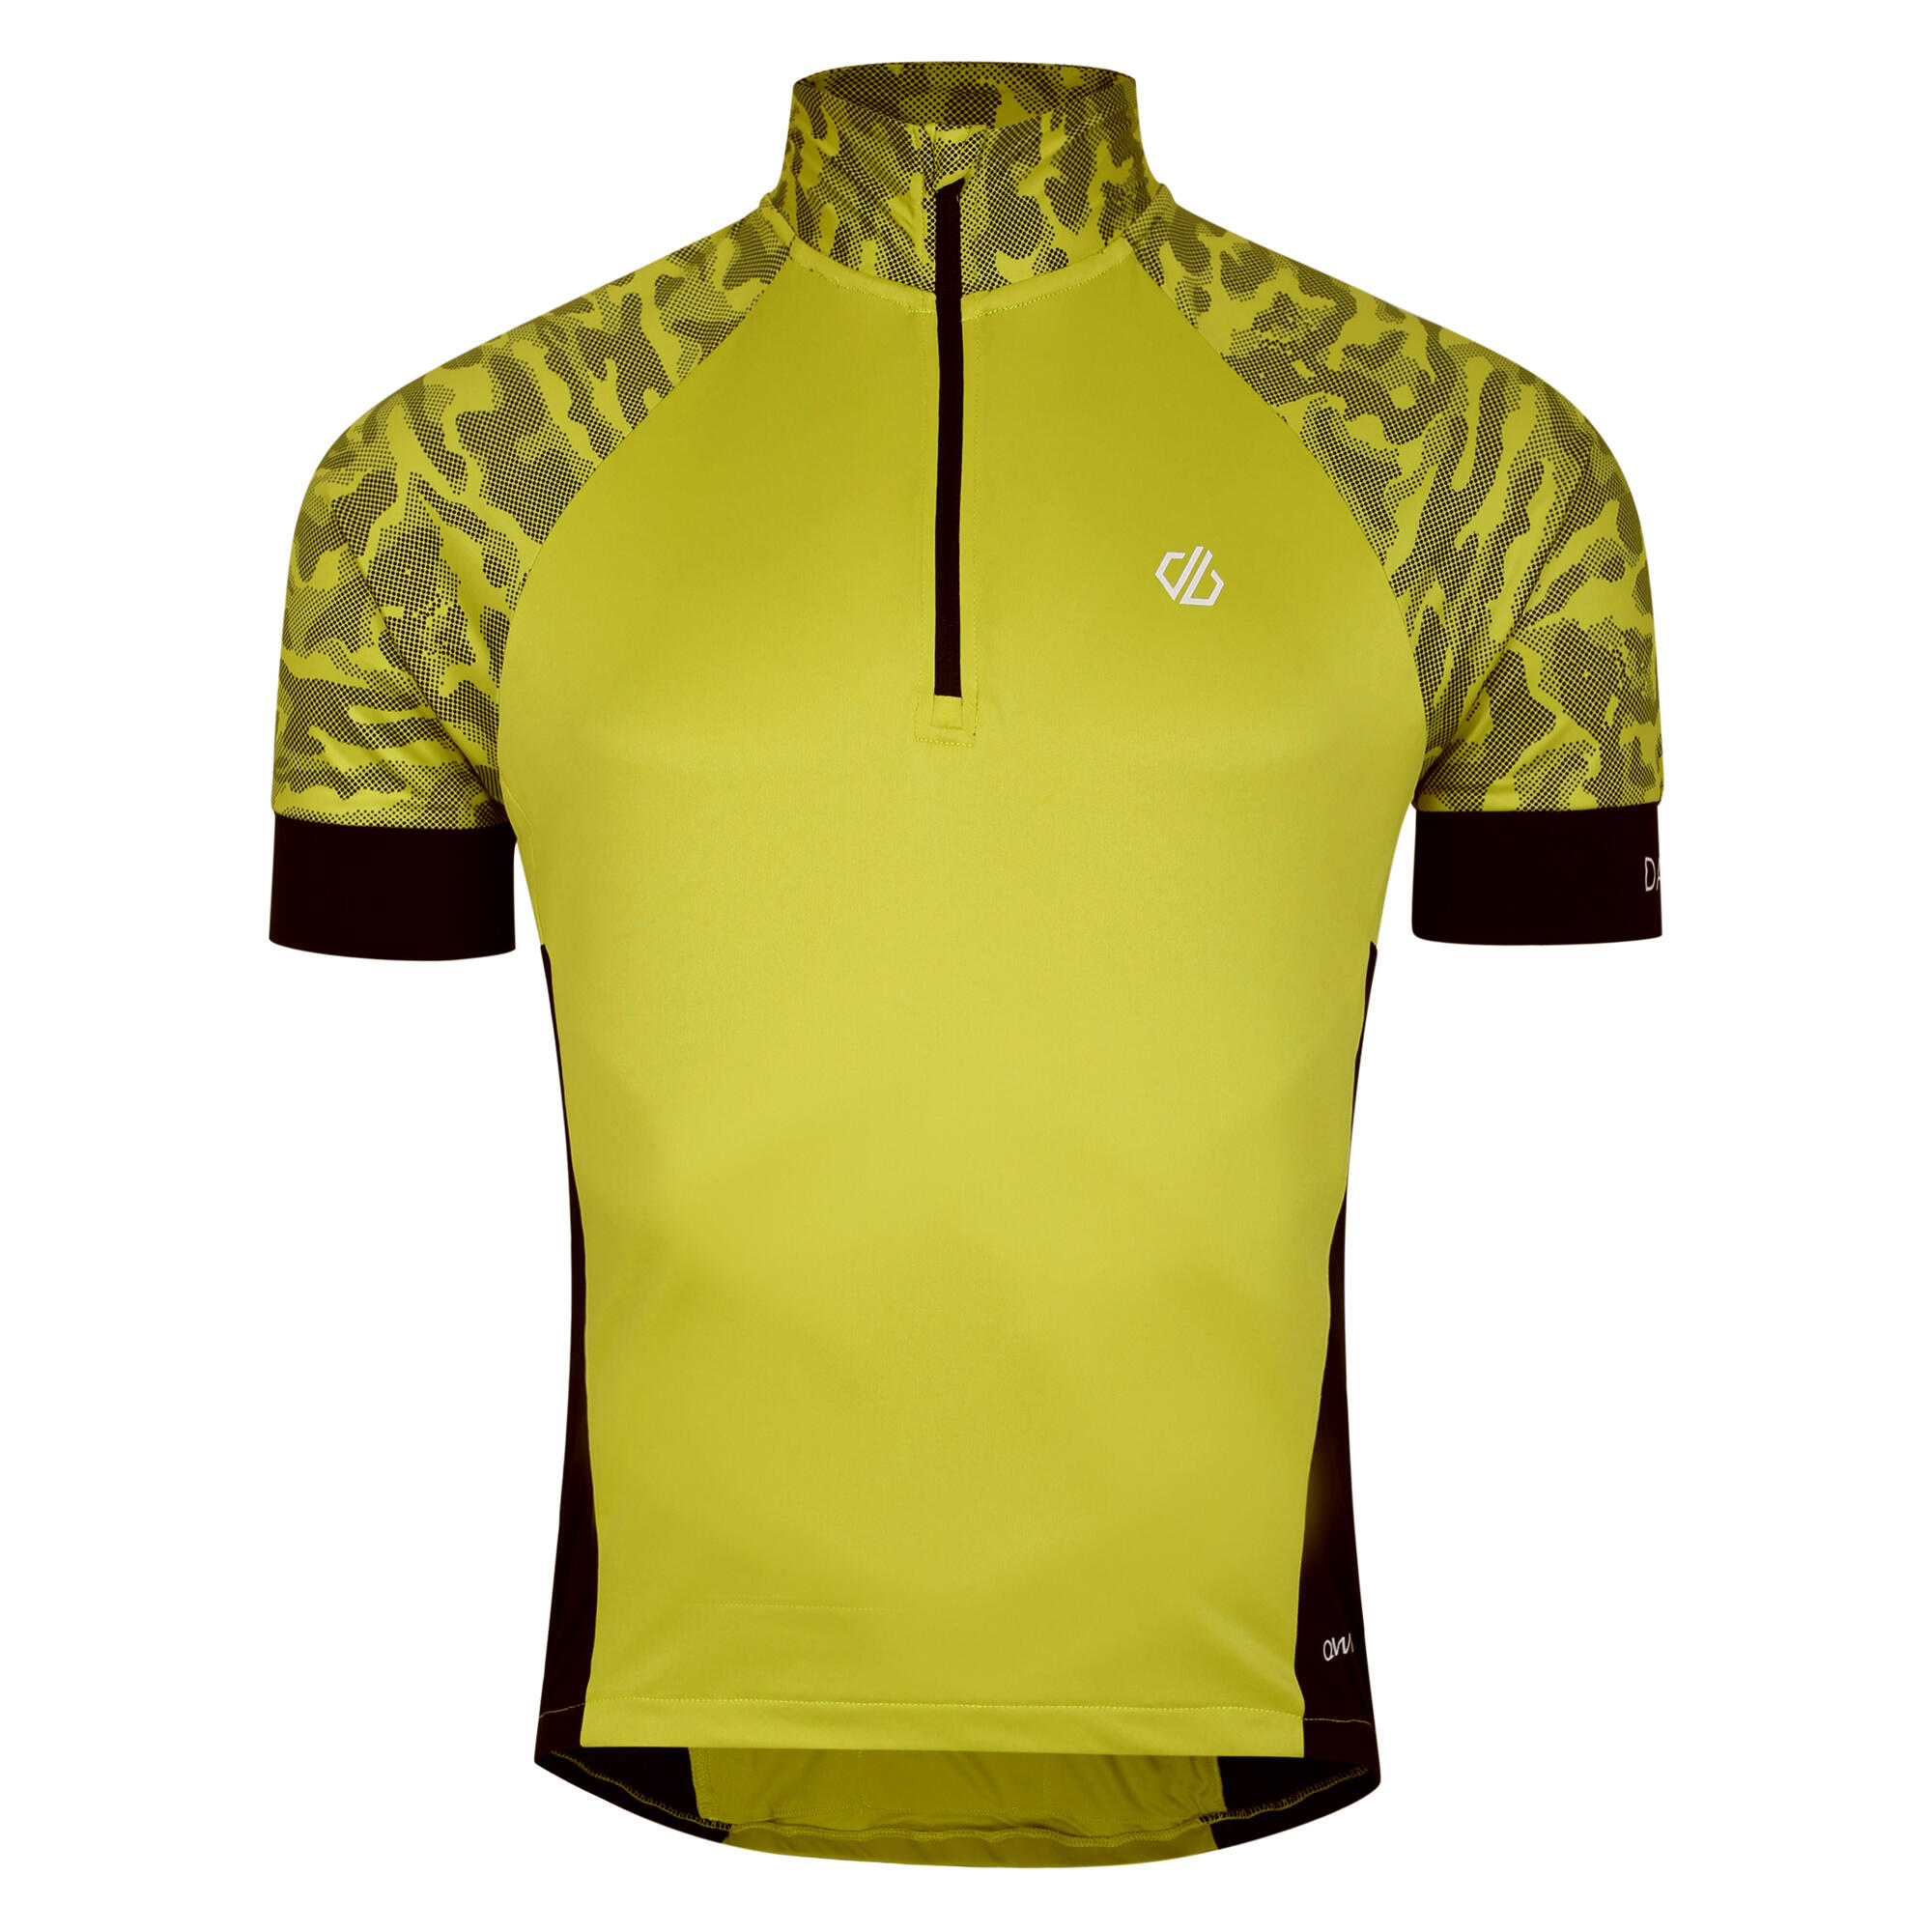 Stay the Course III Men's Cycling Half-Zip, Short Sleeve Jersey 5/5